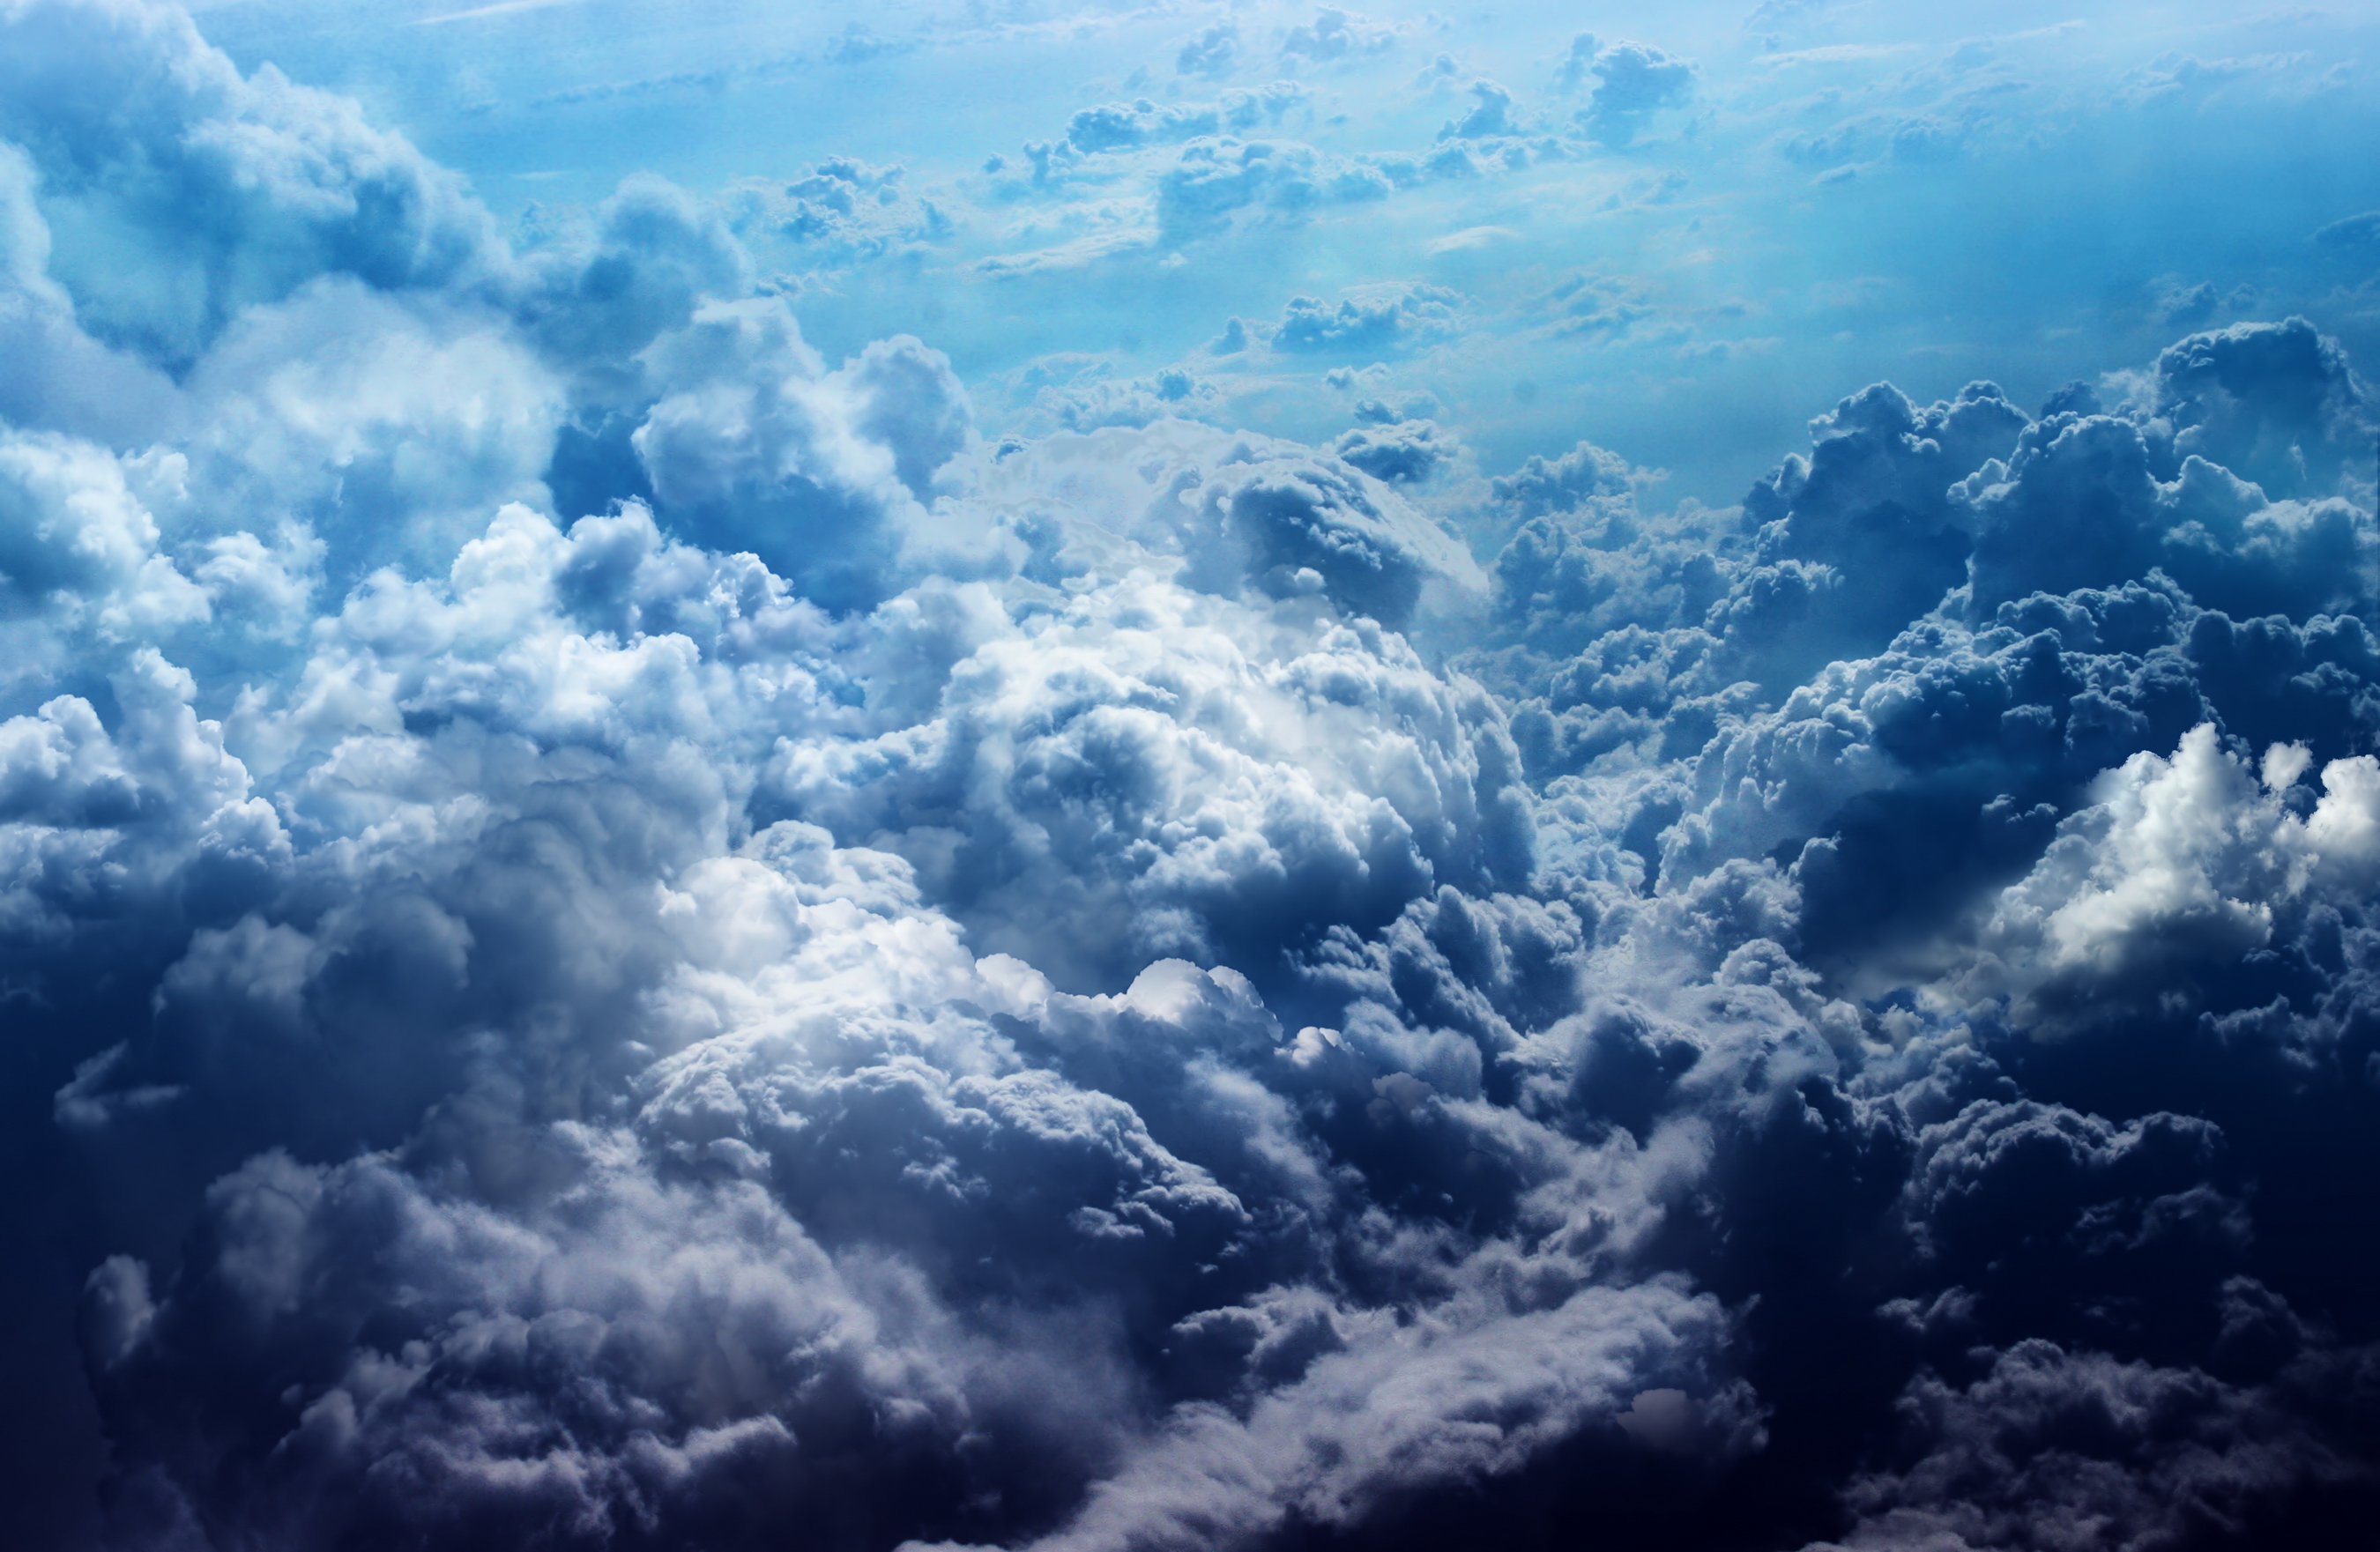 Strayed in the blue clouds / 2700 x 1761 / Skyandclouds ...